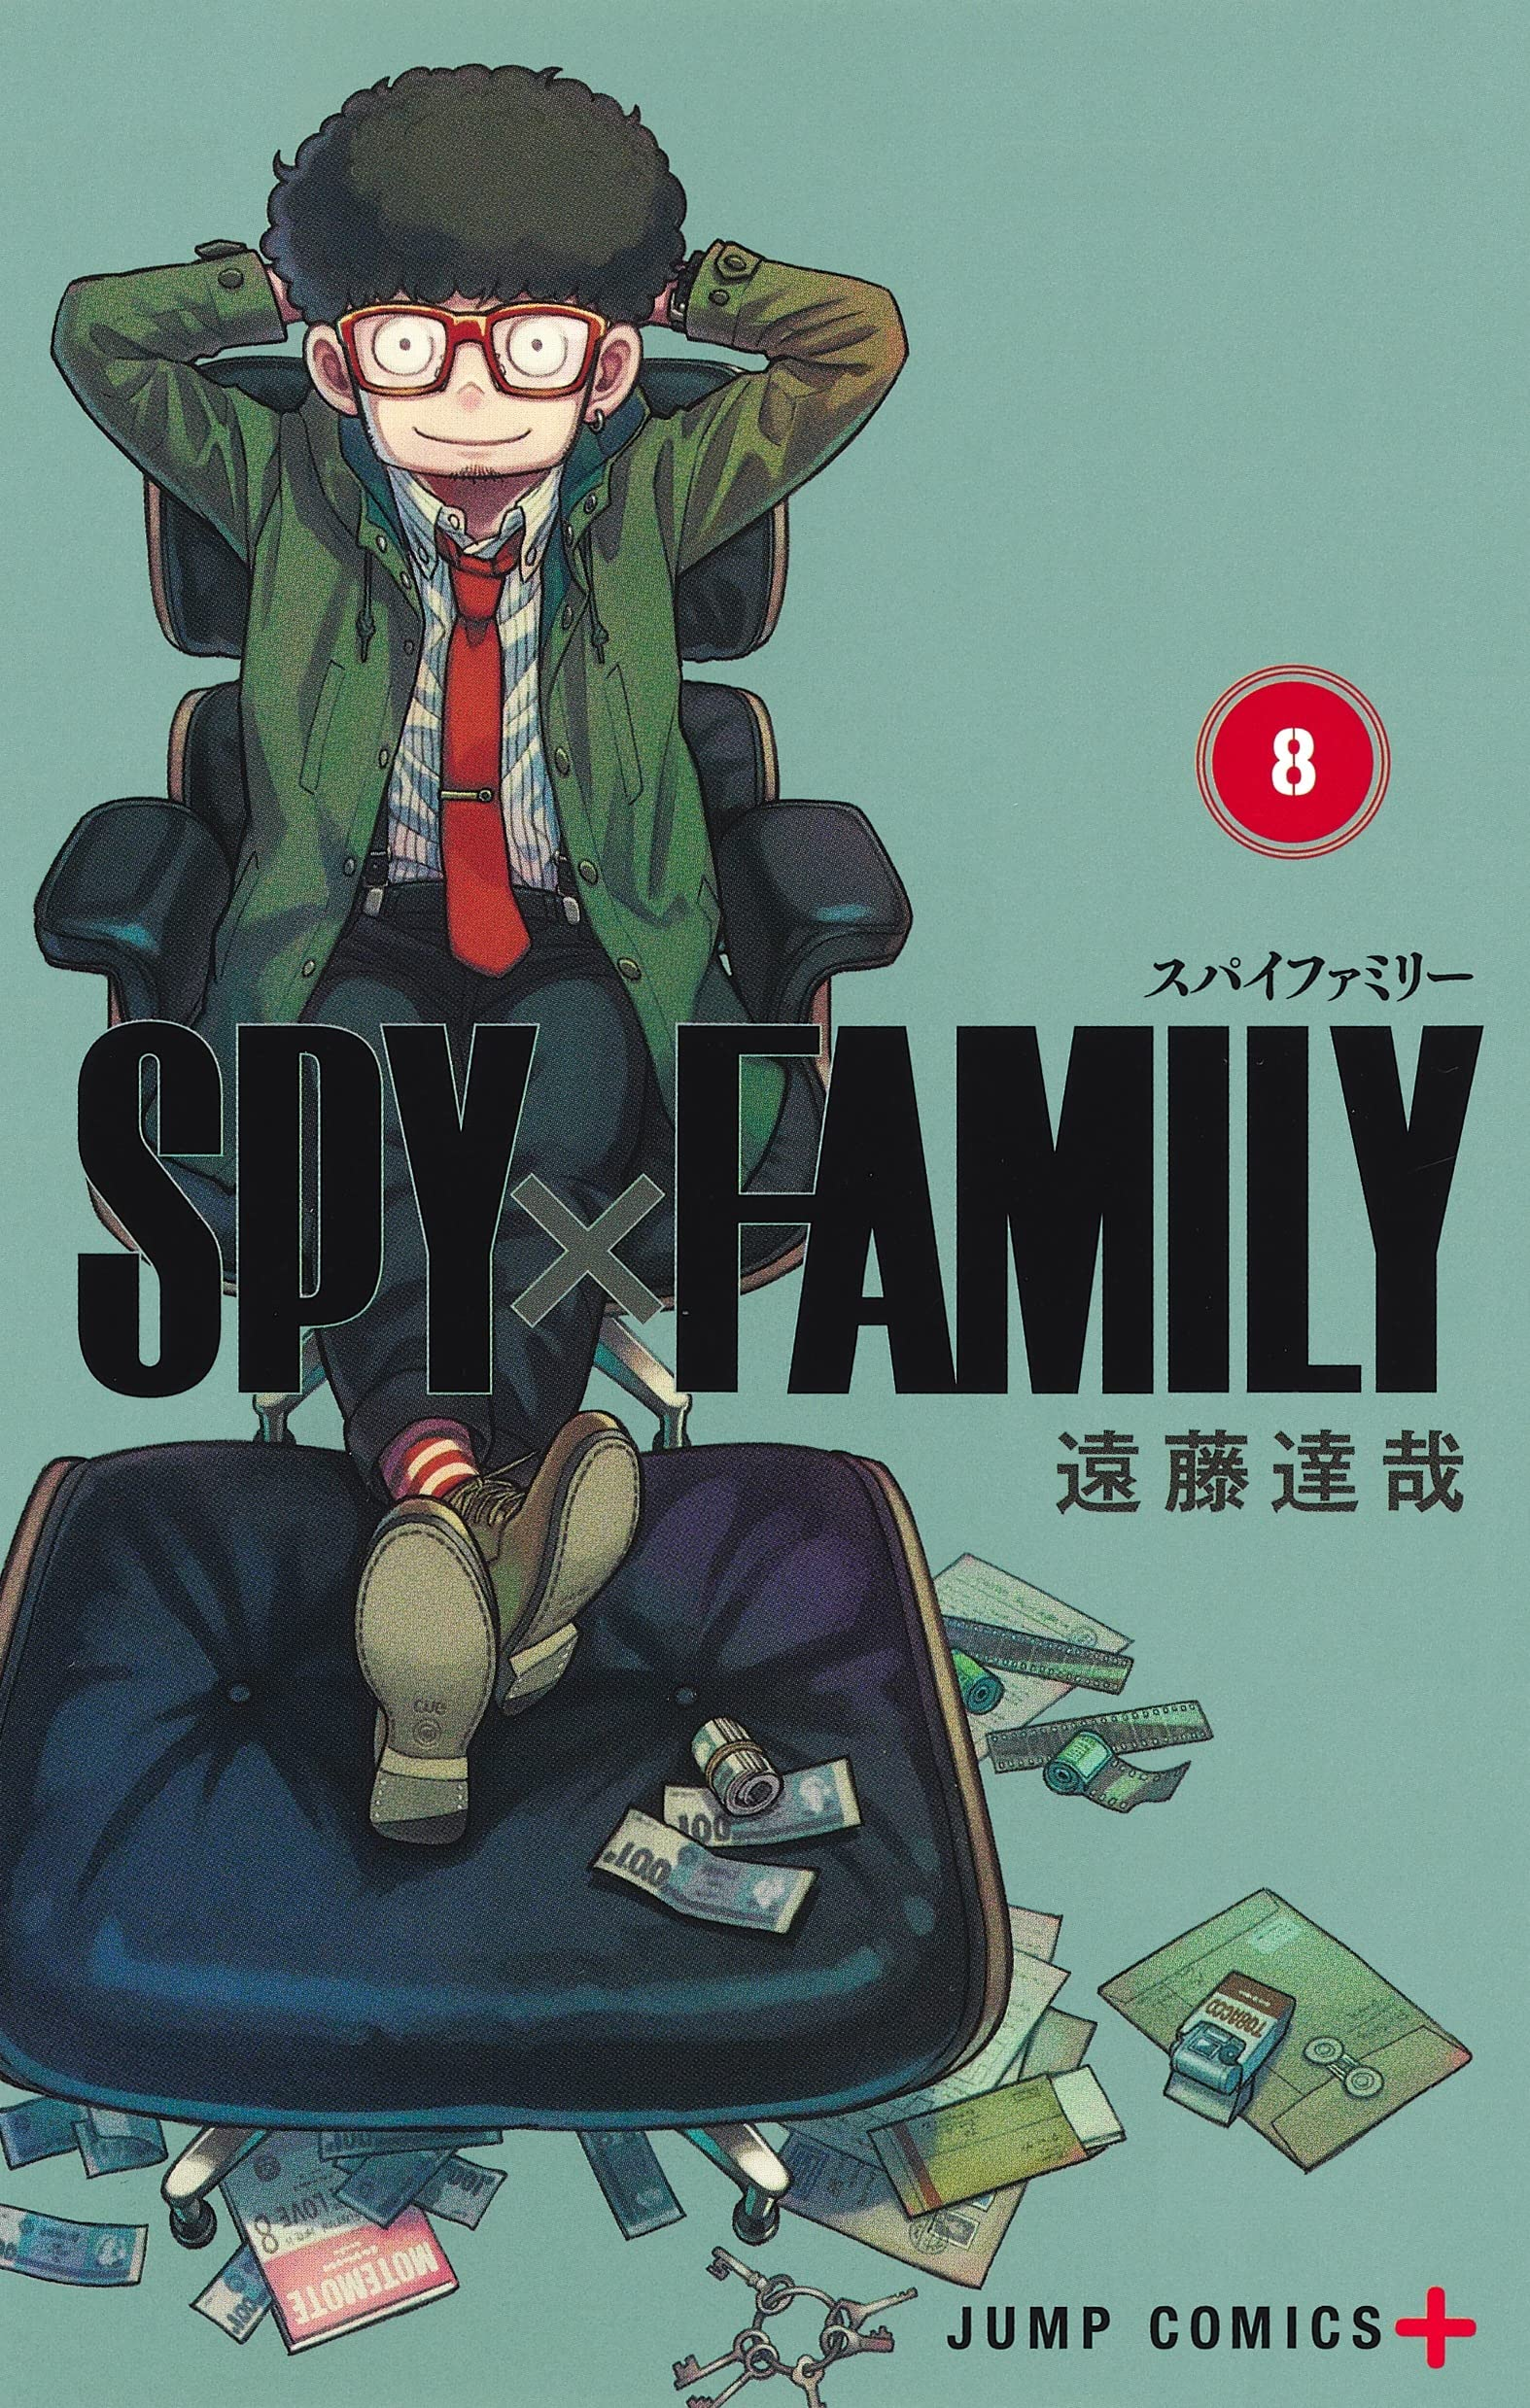 How many seasons of Spy x Family are there?